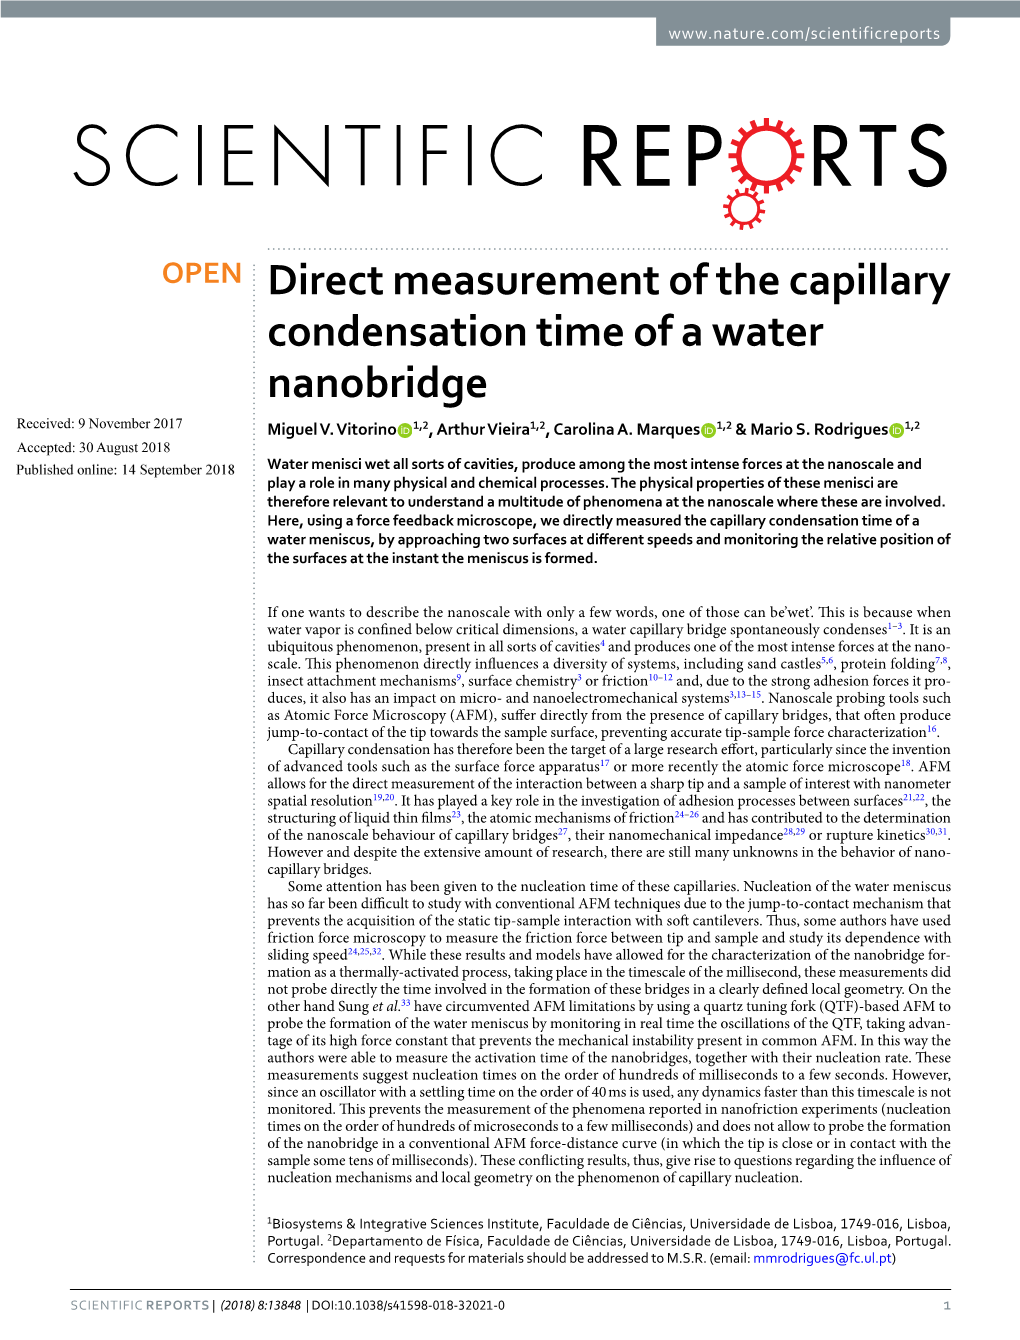 Direct Measurement of the Capillary Condensation Time of a Water Nanobridge Received: 9 November 2017 Miguel V